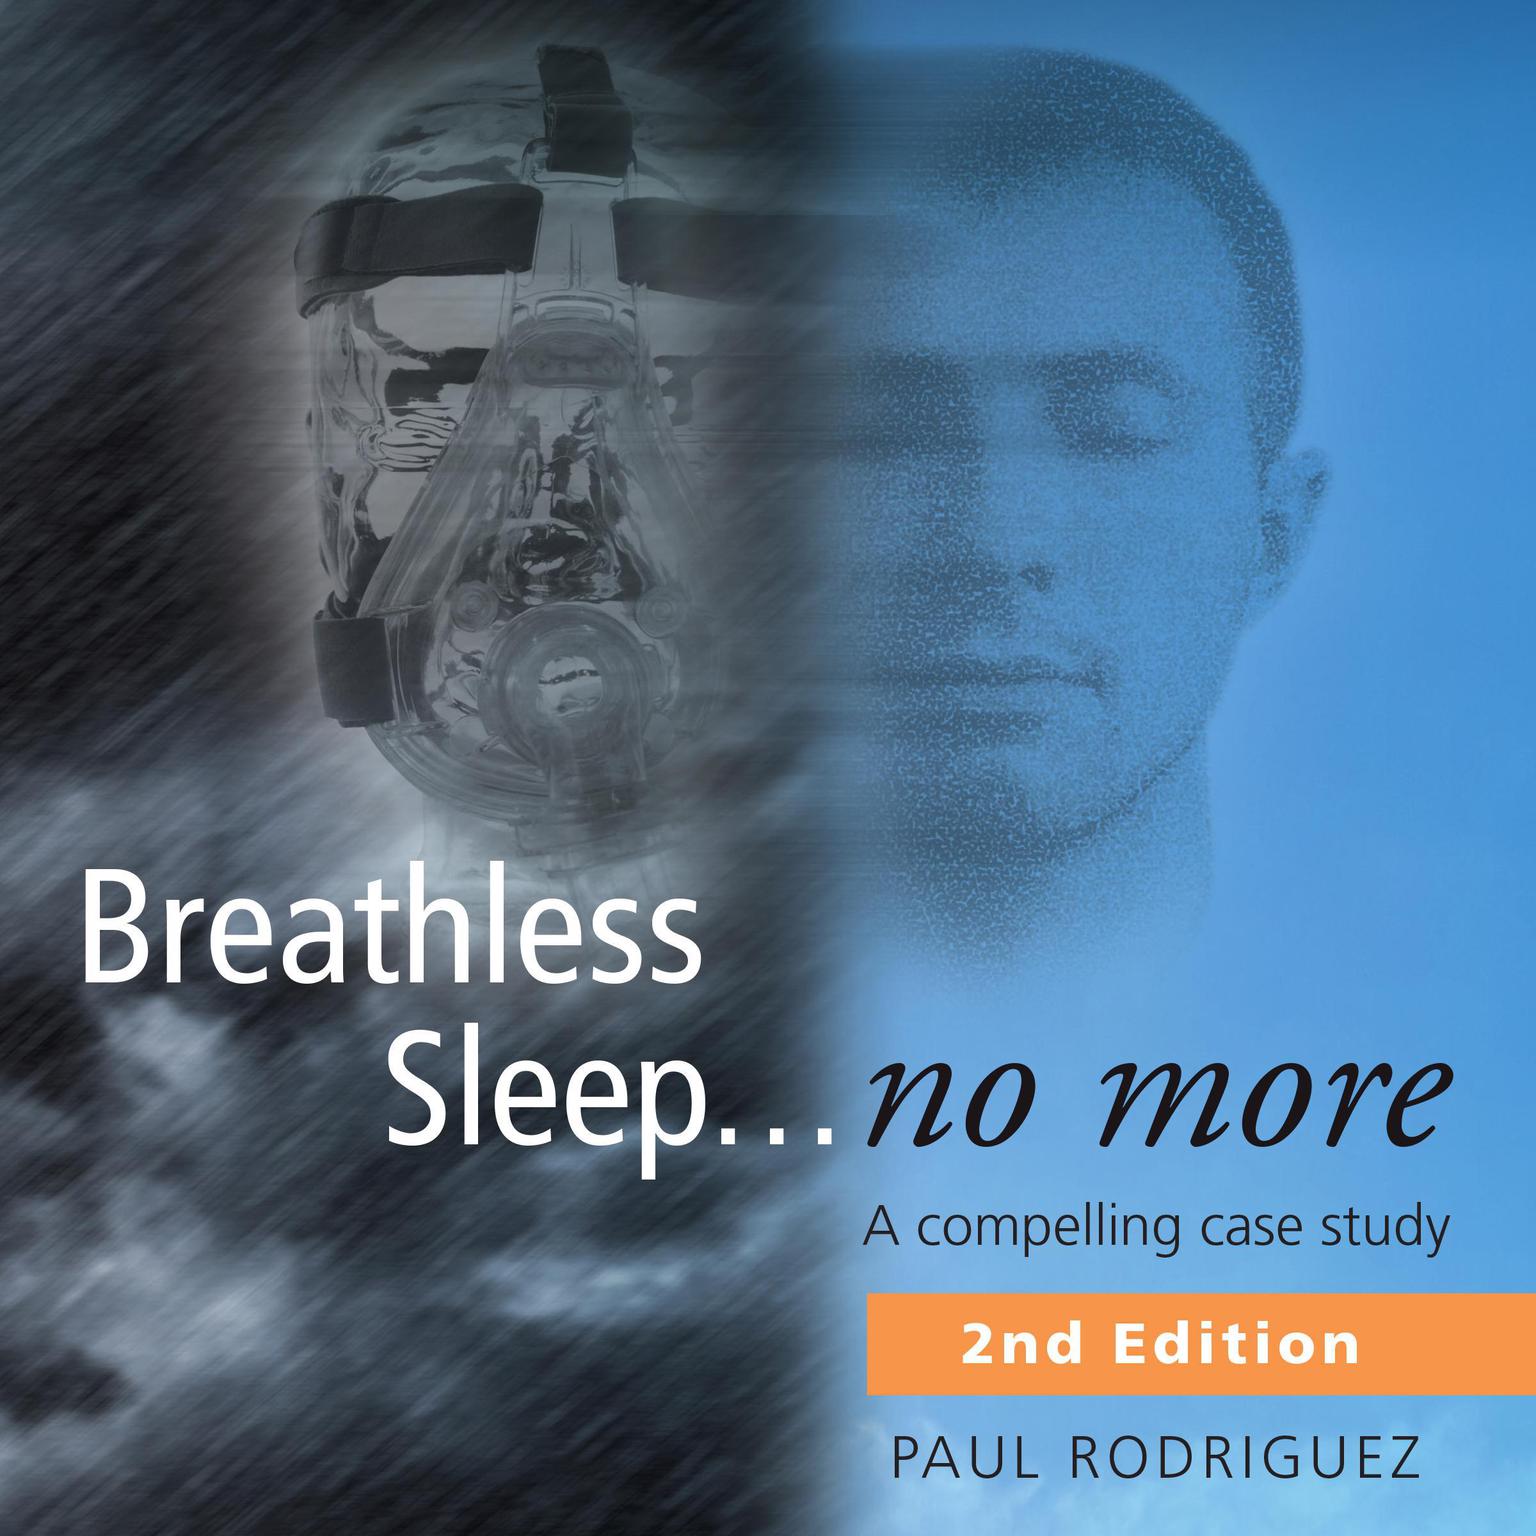 Breathless Sleep...no more. A compelling case study (Abridged) Audiobook, by Paul Rodriguez